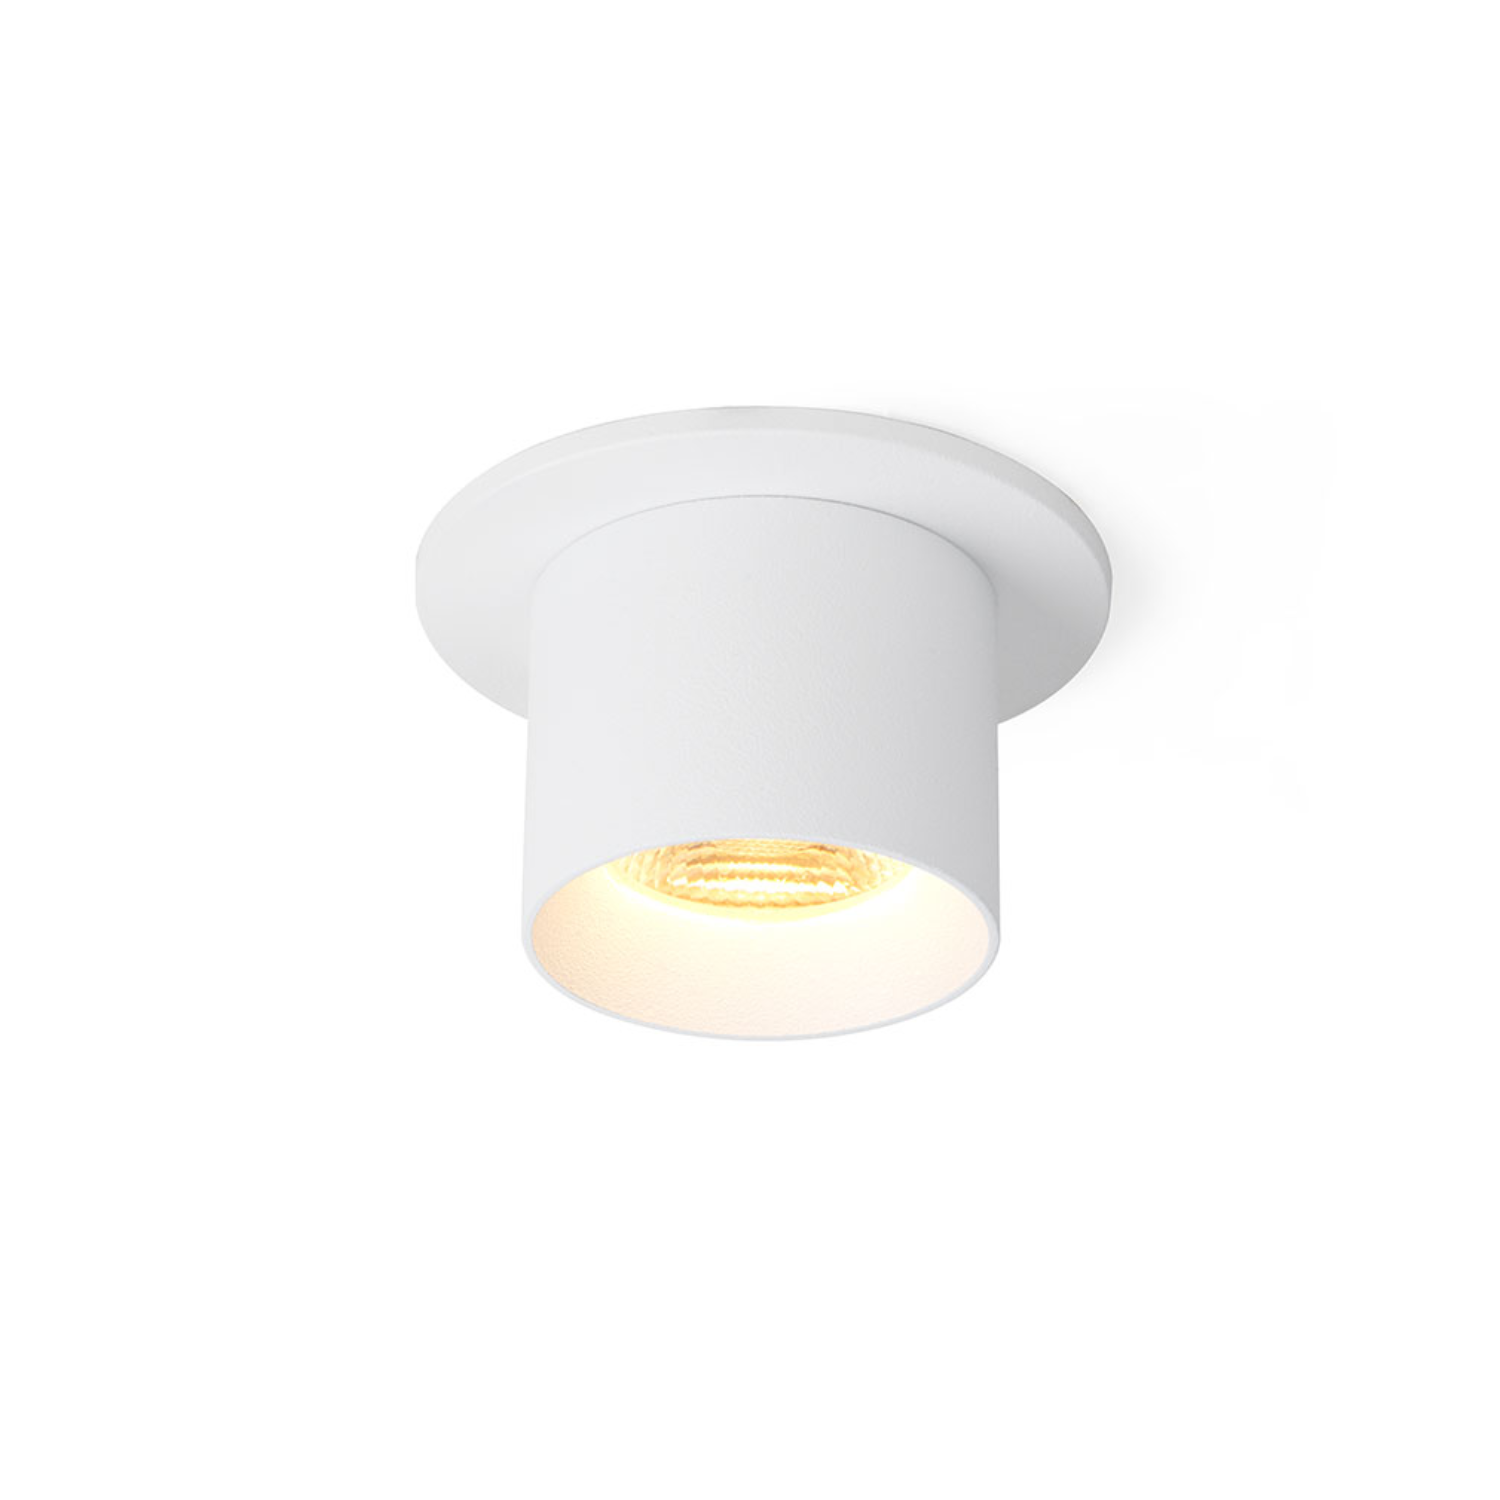 AUDY-IN OUT - Ceiling Light